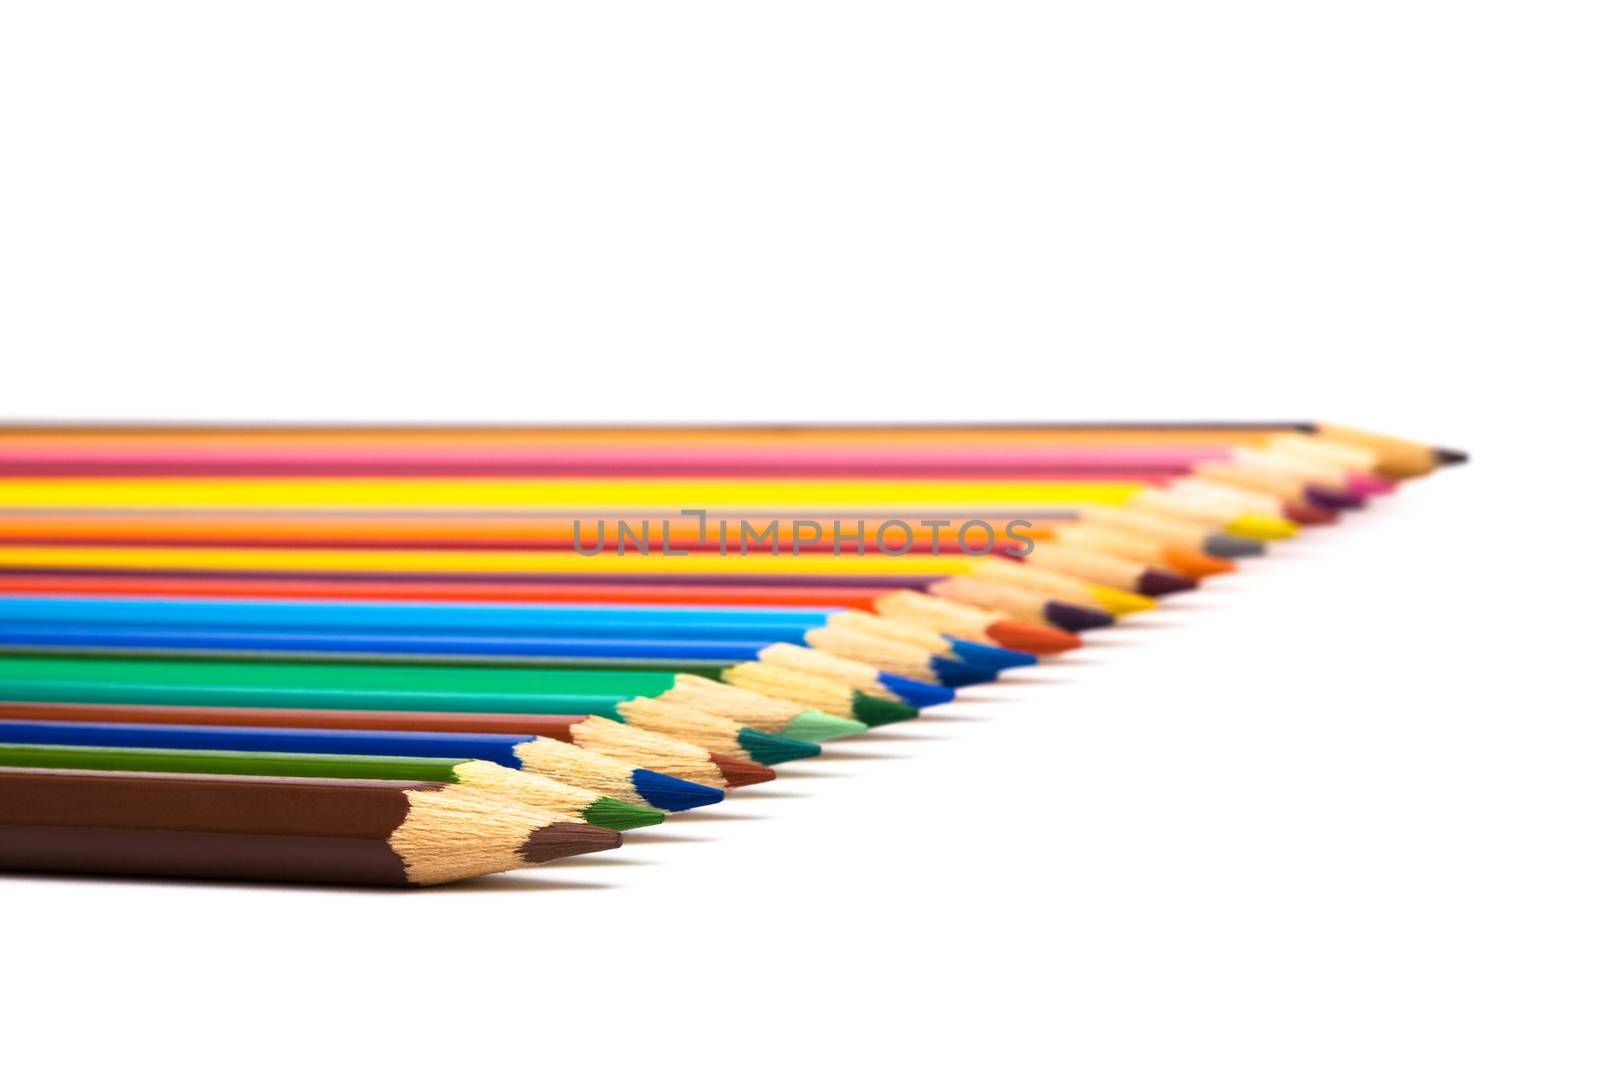 Beautiful color pencils on a white background